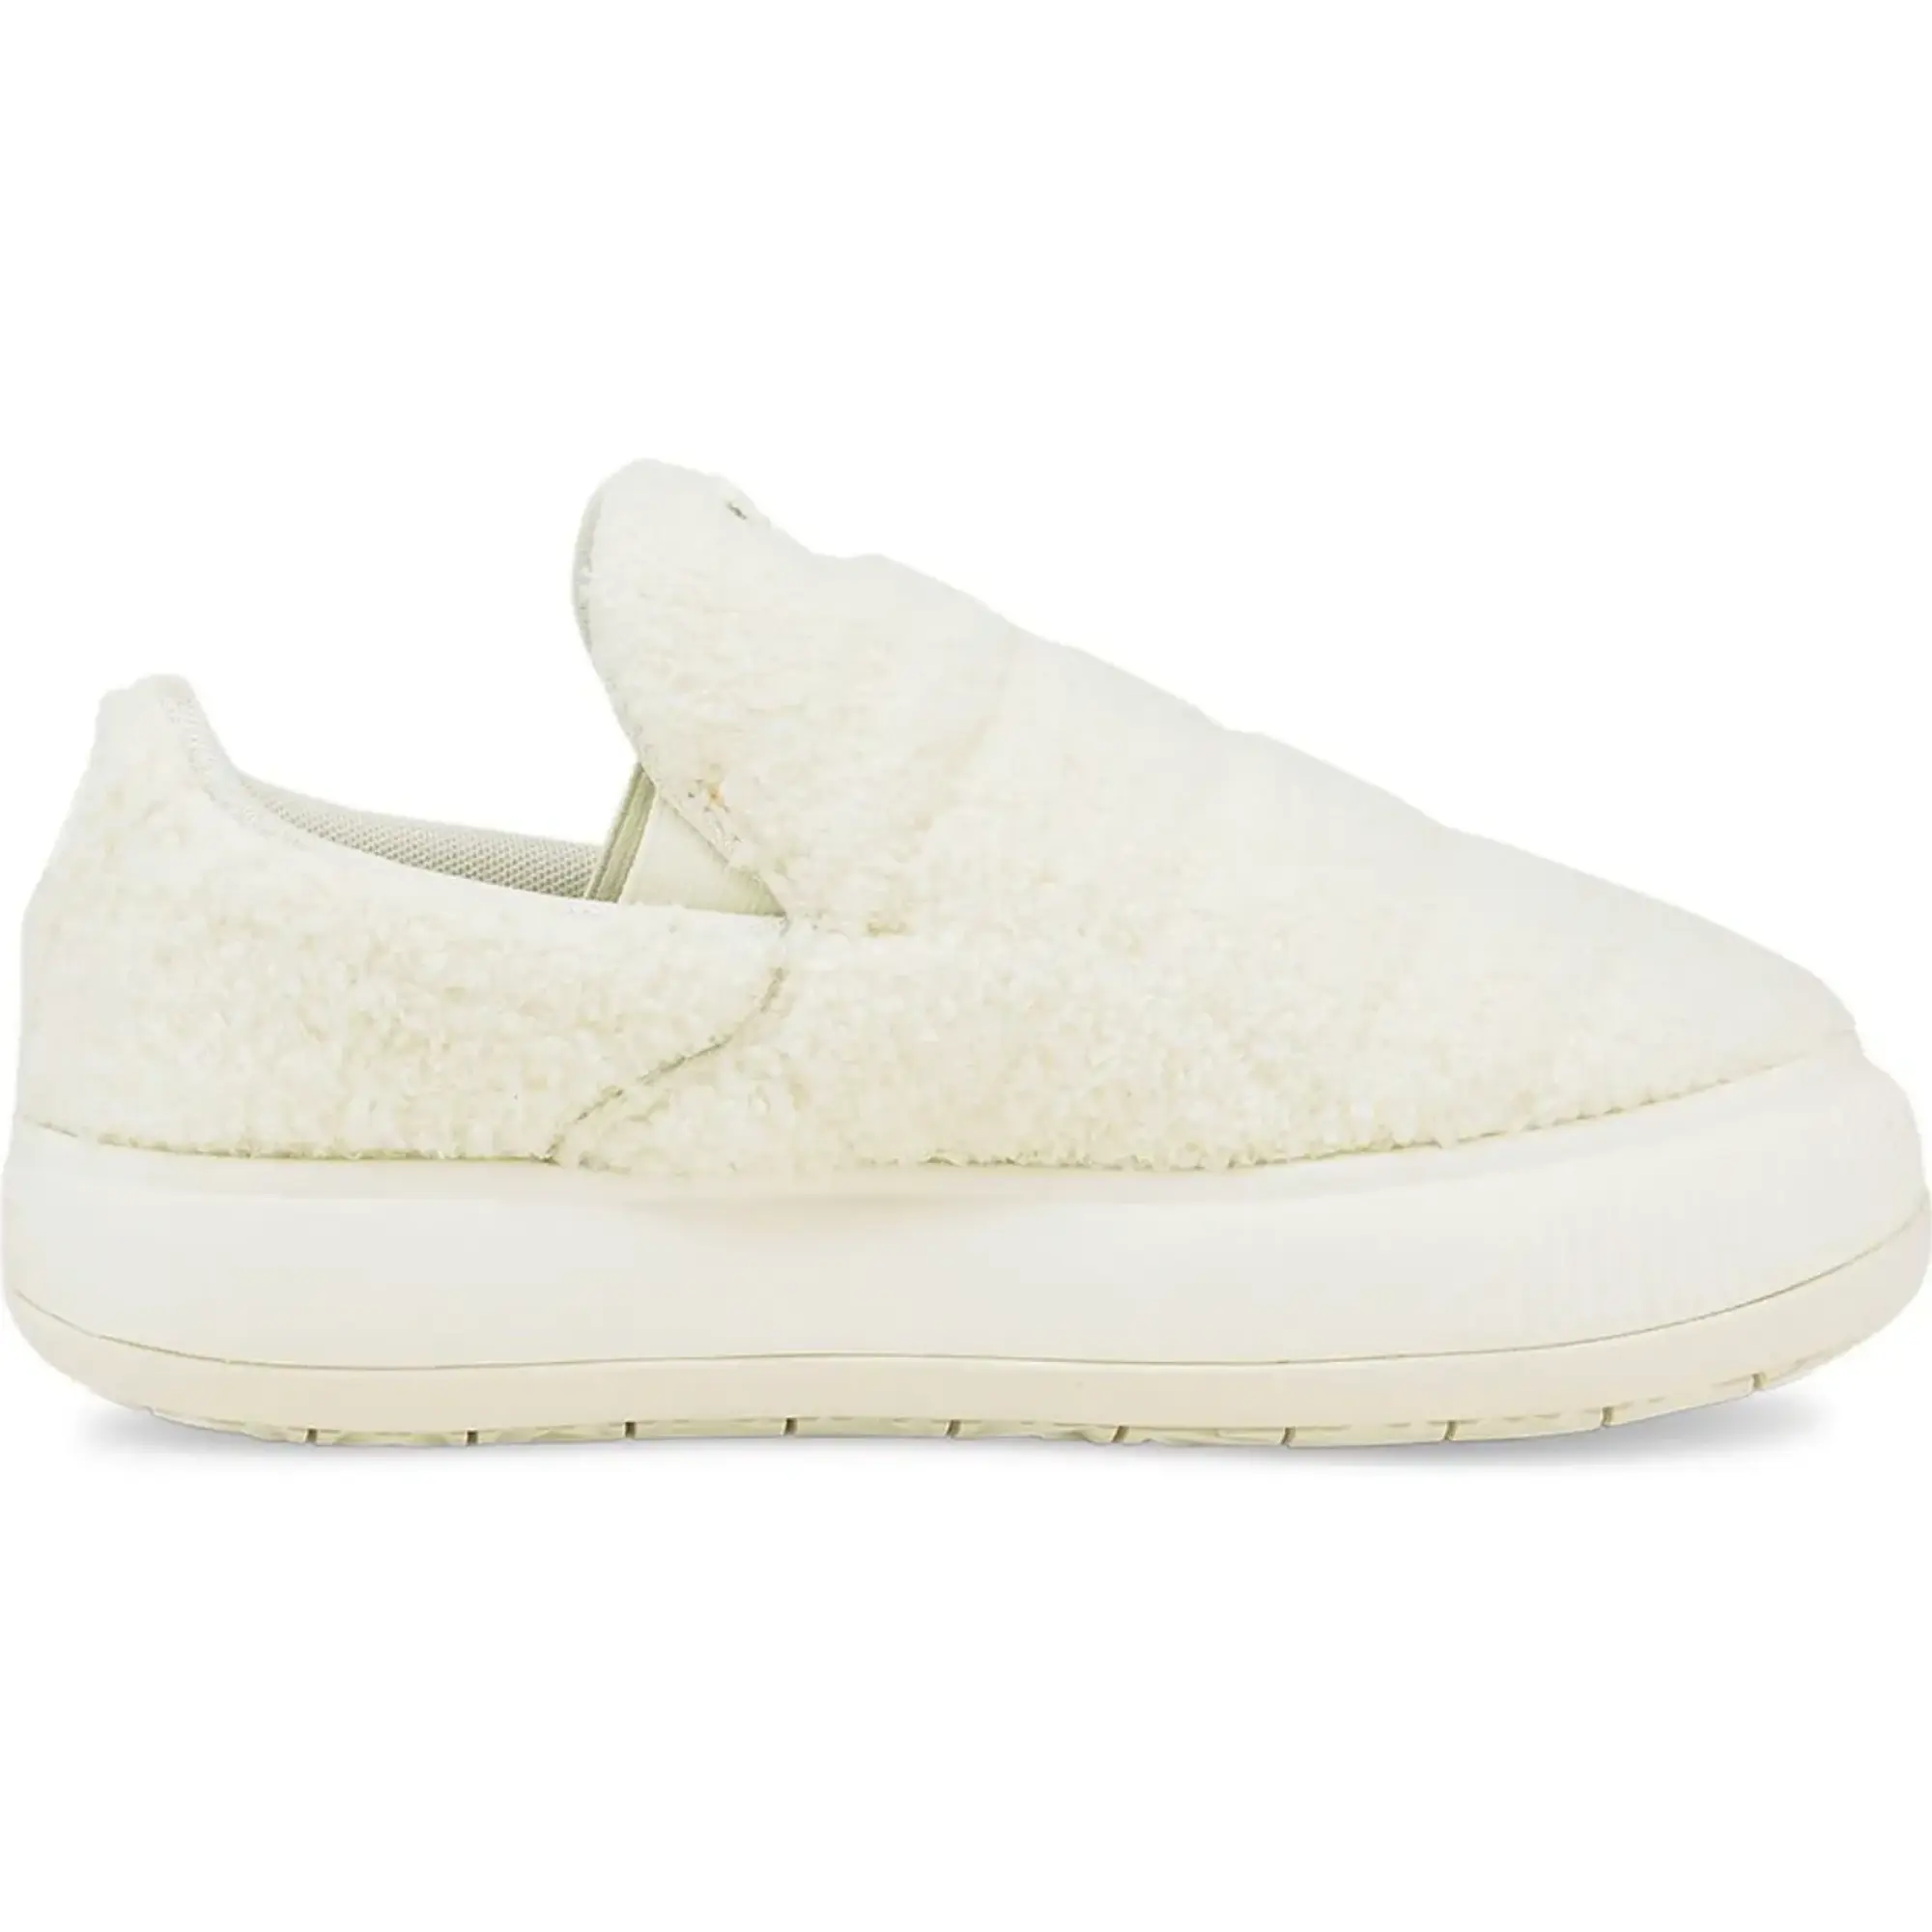 Puma Select Suede Mayu Slip-on Teddy Trainers  - White